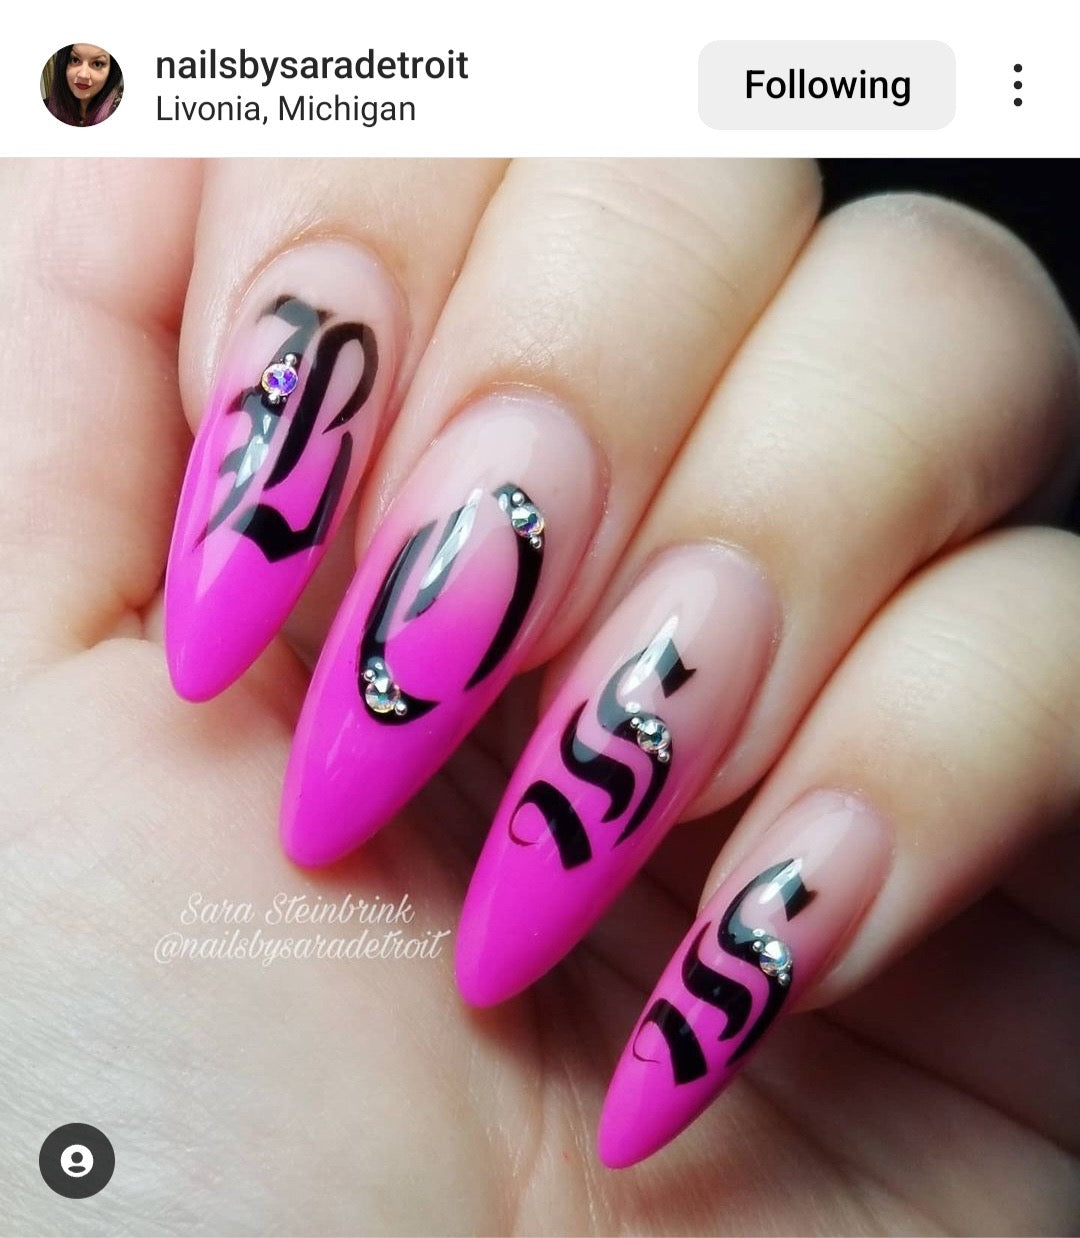 Fabi - White matted acrylic nails with the letter M 💁🏽‍♀️... | Facebook